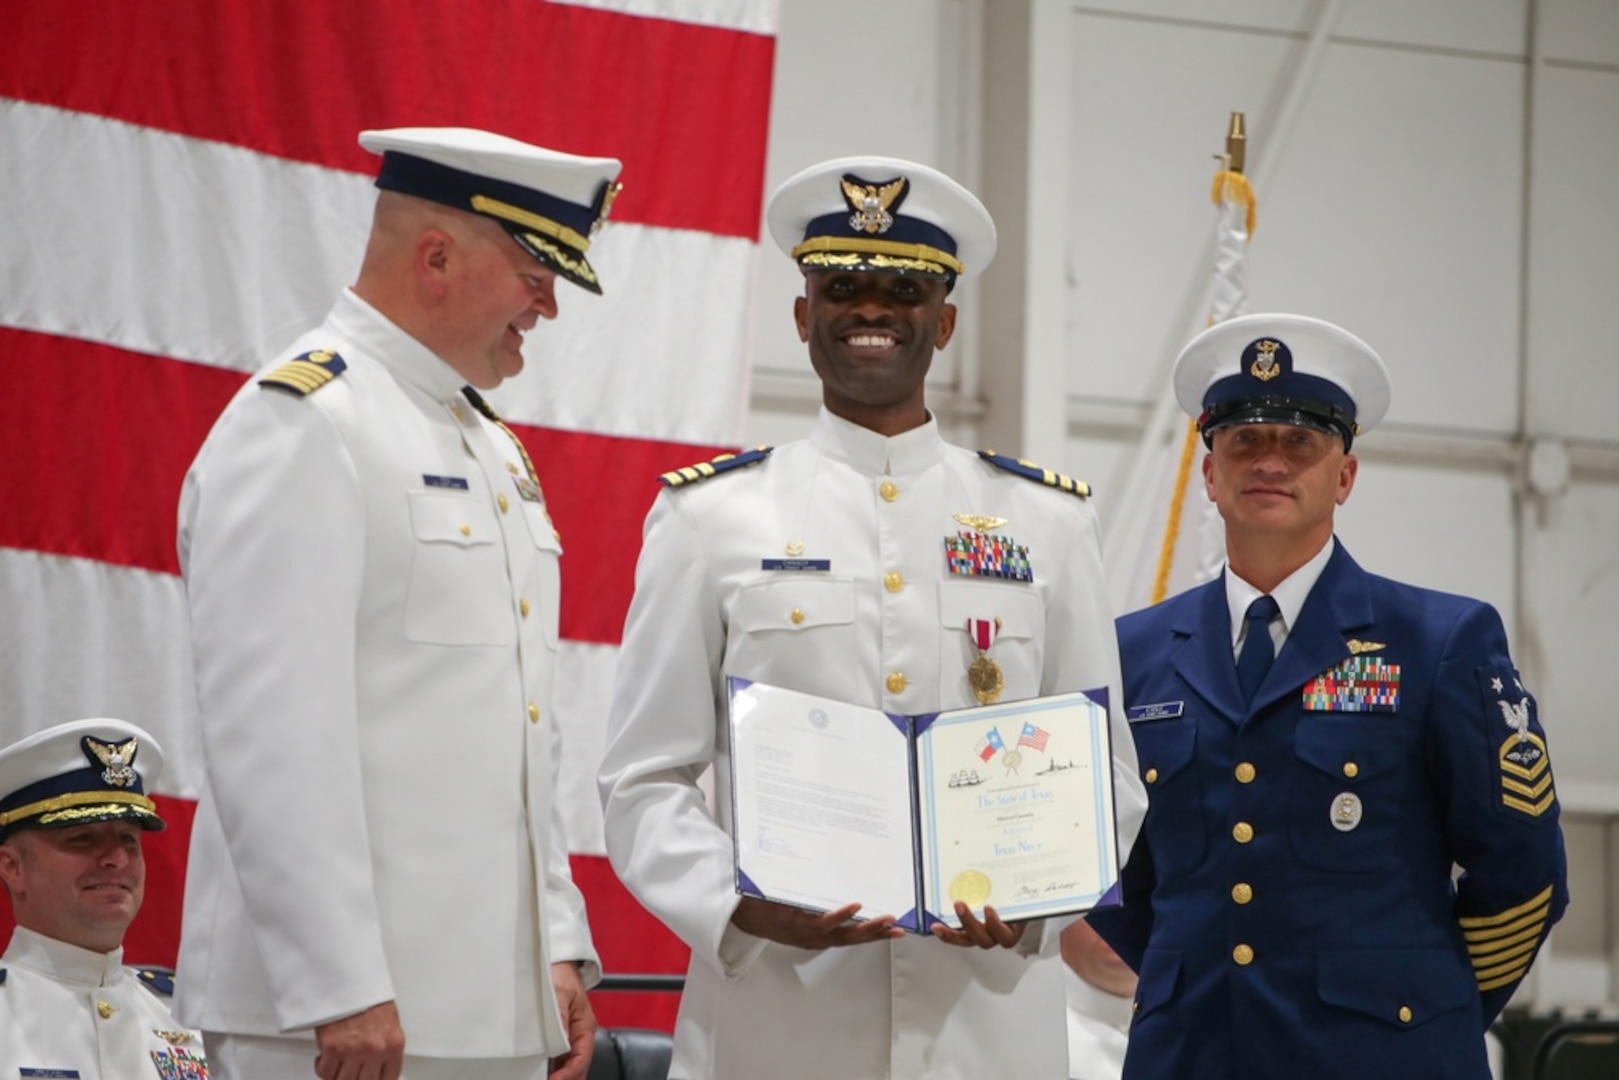 Capt. Marcus Canady poses for a photo during a change-of-command ceremony for Coast Guard Air Station Houston, Texas, June 11, 2021. Cmdr. Ryan Matson relieved Capt. Canady as the commanding officer. (U.S. Coast Guard photo by Petty Officer 3rd Class Paige Hause)